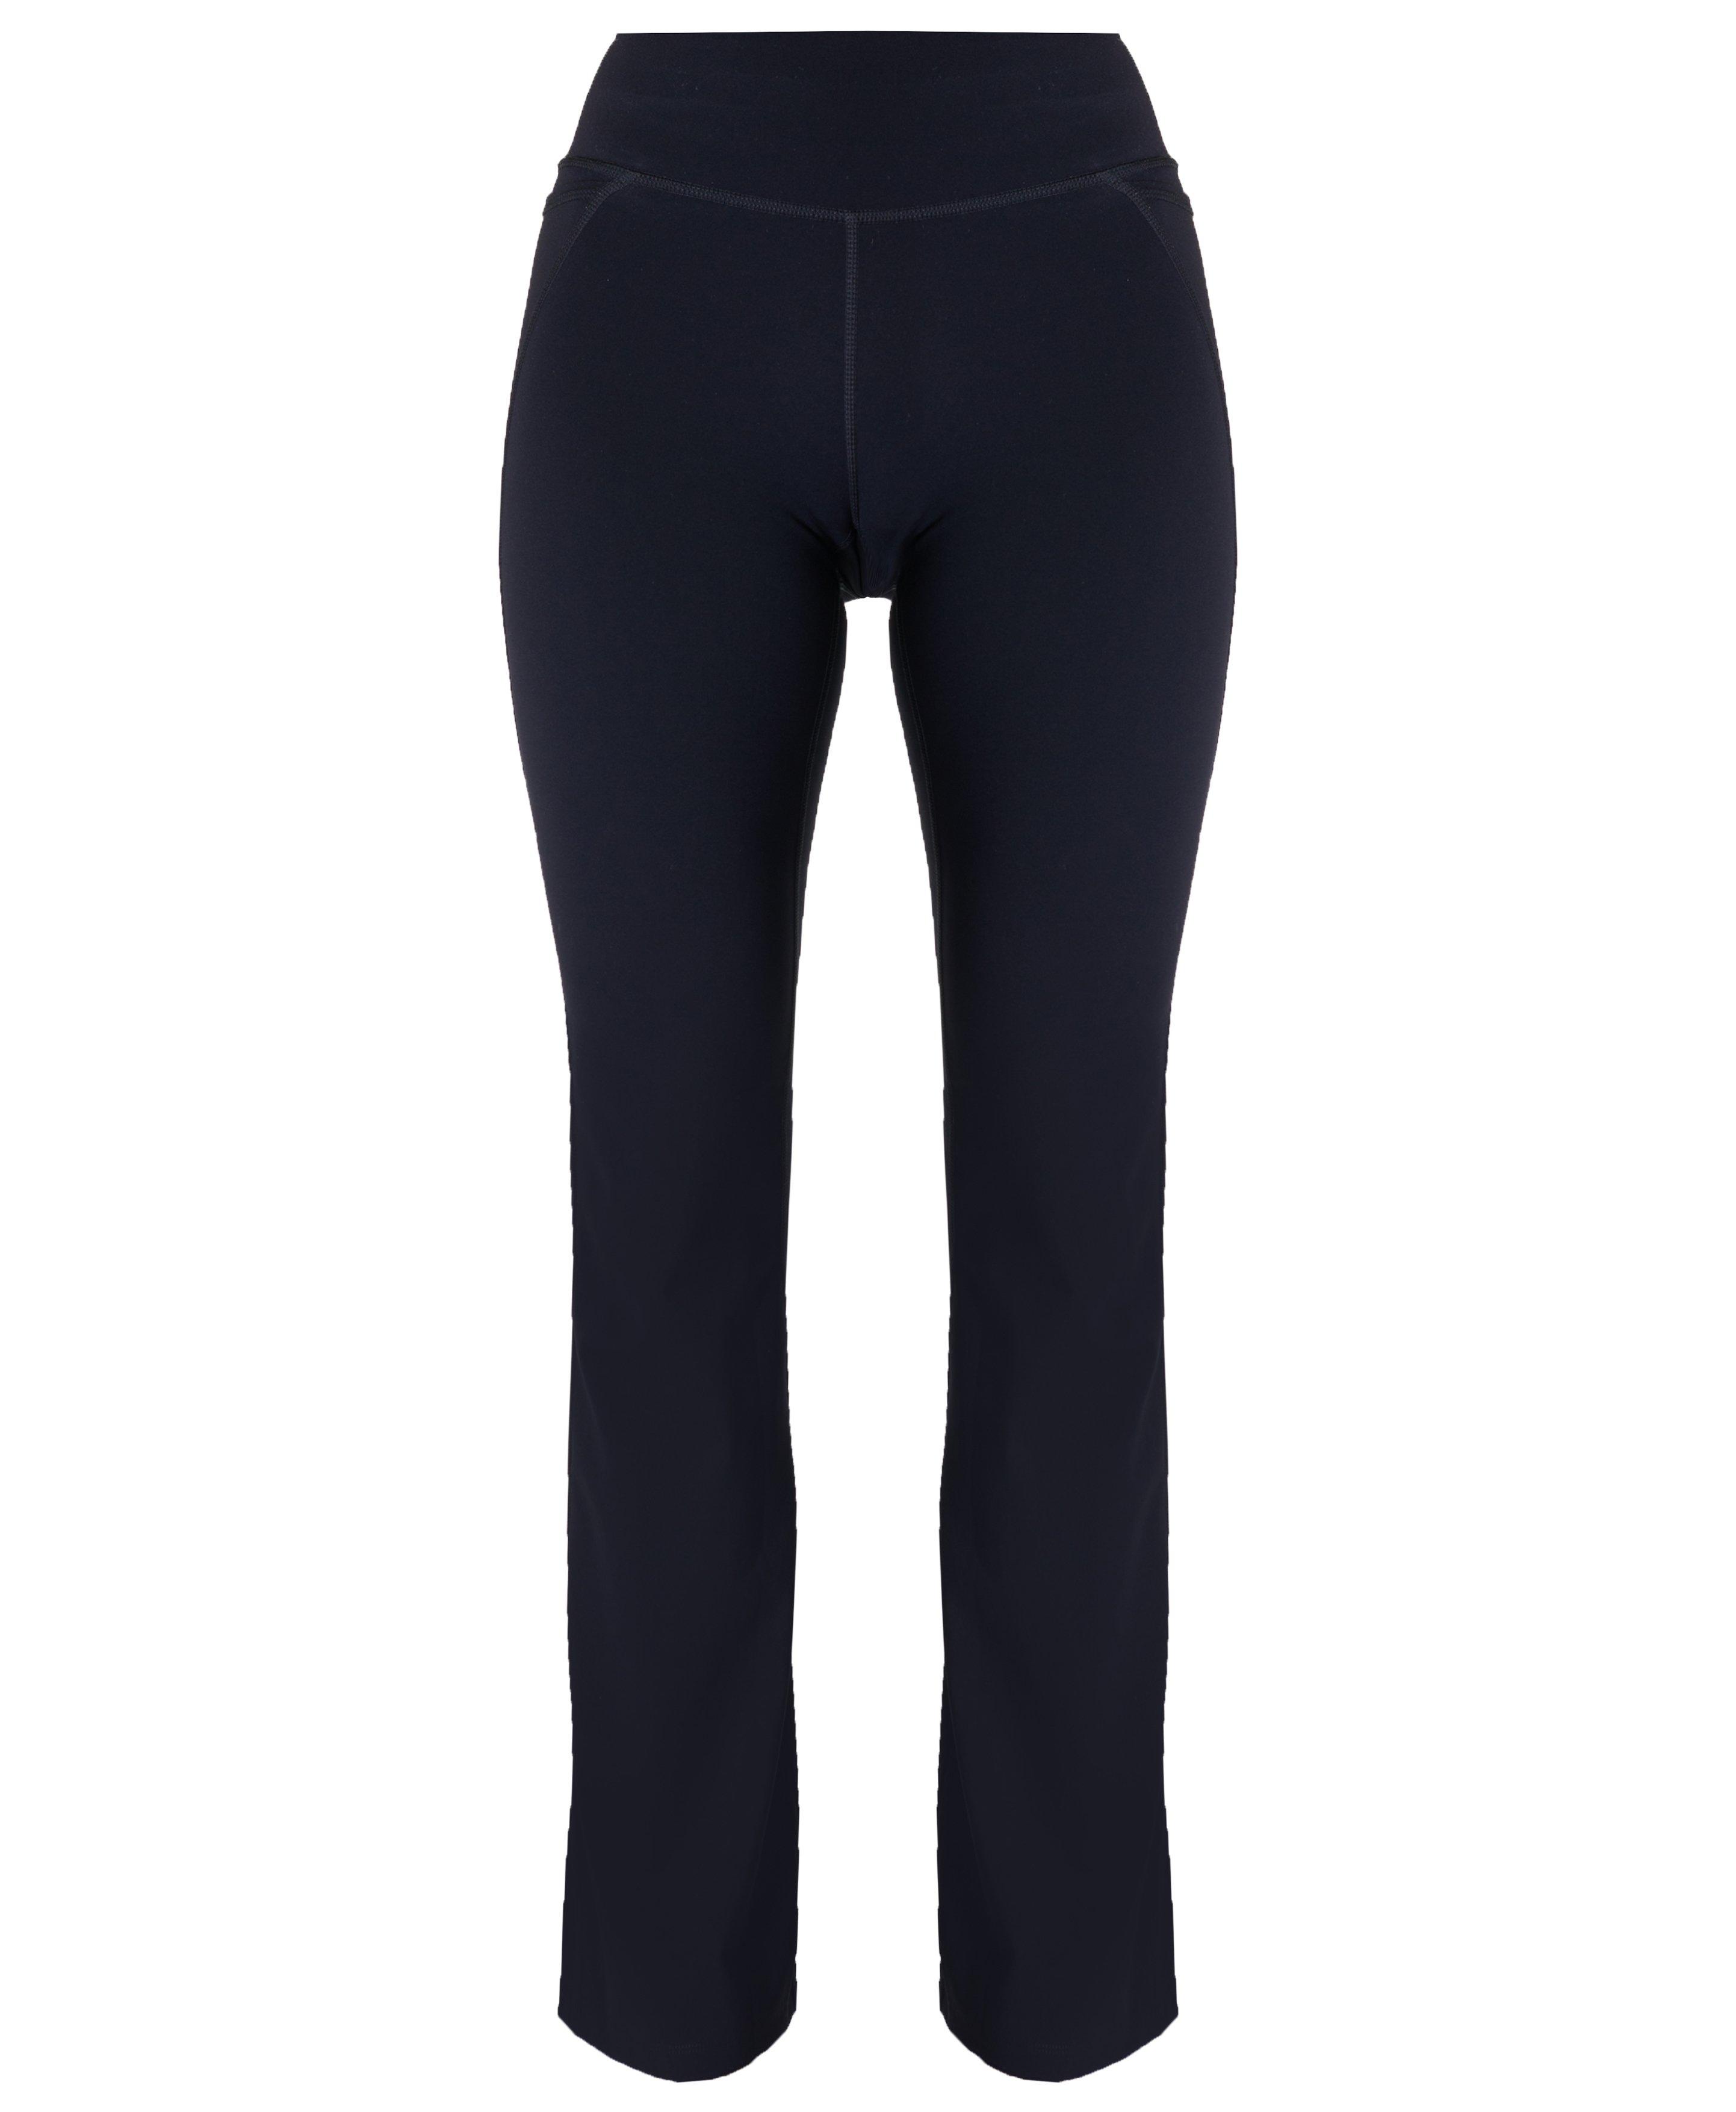 LUCY POWERMAX PANTS Perfect Booty Collection Bootcut Yoga Leggings